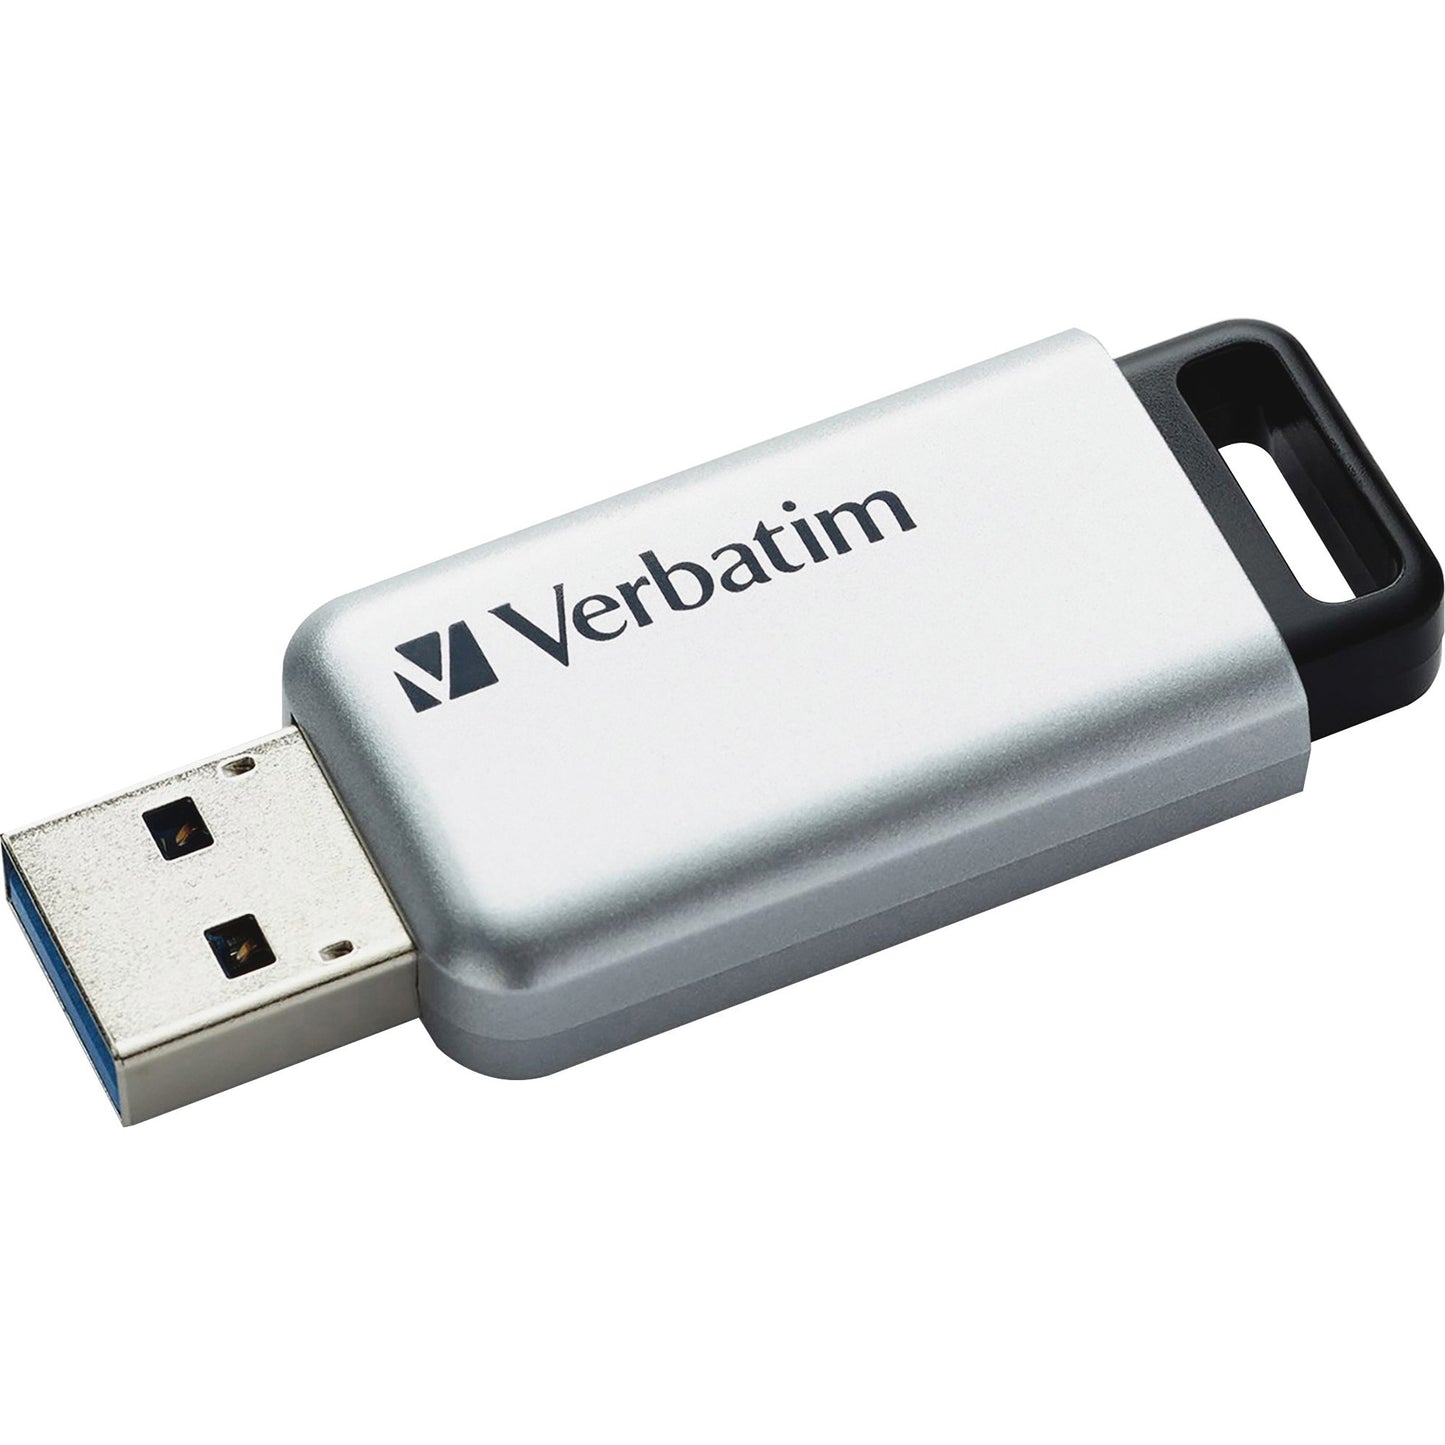 Verbatim 32GB Store'n' Go Secure Pro USB 3.0 Flash Drive with AES 256 Hardware Encryption - Silver